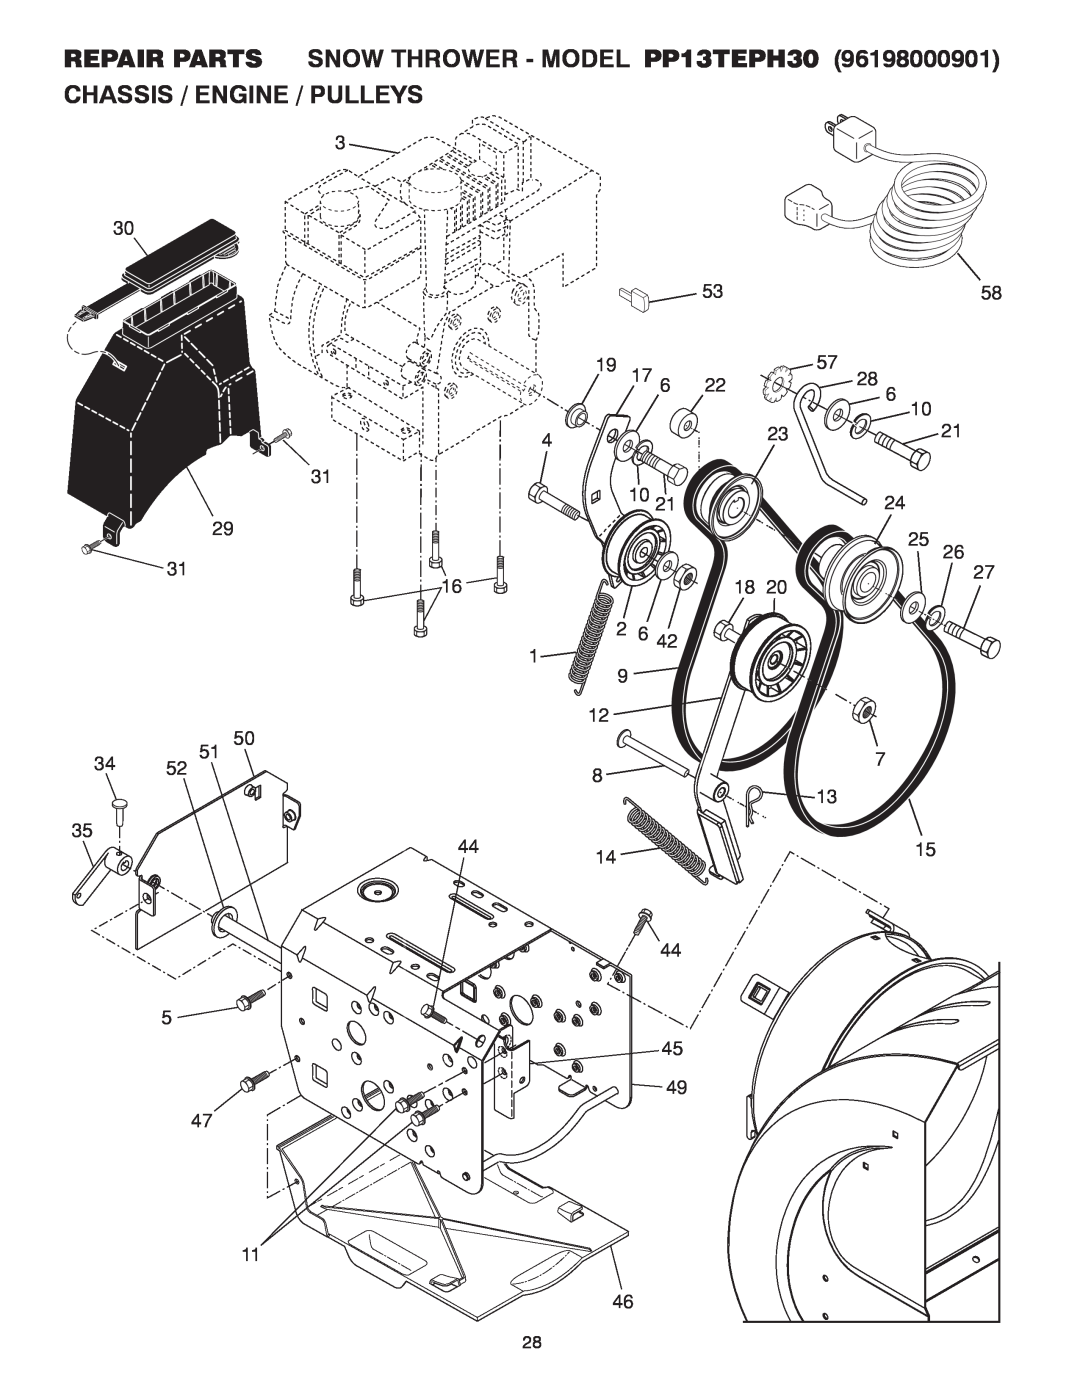 Poulan 416751, 96198000901, PP12TEPH30 owner manual Chassis / Engine / Pulleys, REPAIR PARTS SNOW THROWER - MODEL PP13TEPH30 